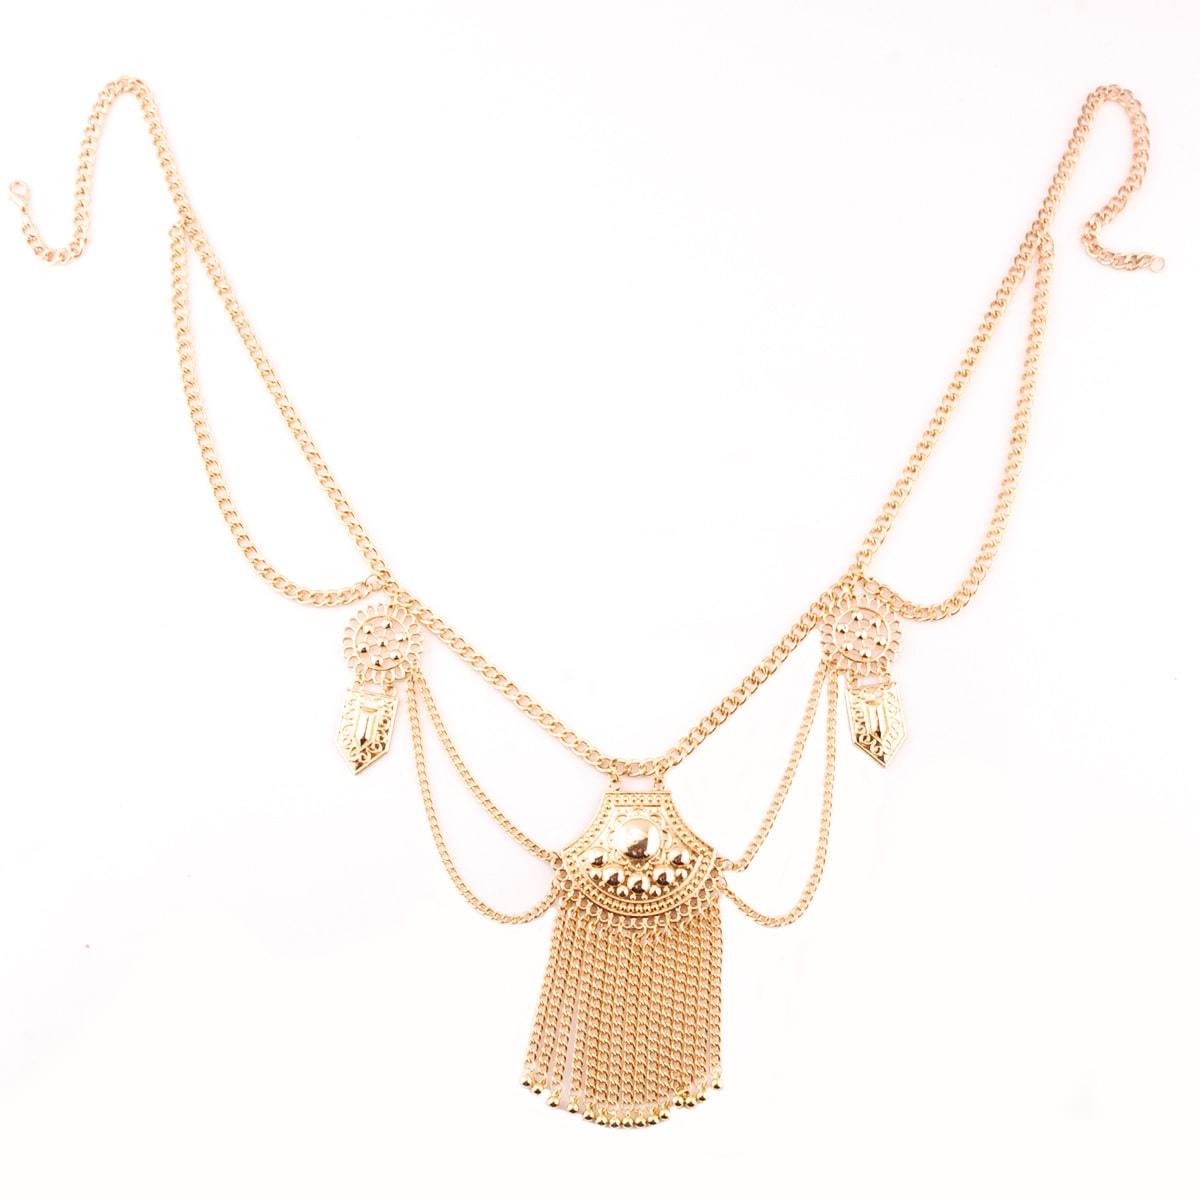 Boho Tassel Gold Belly Chain Jewelry-ChicBohoStyle